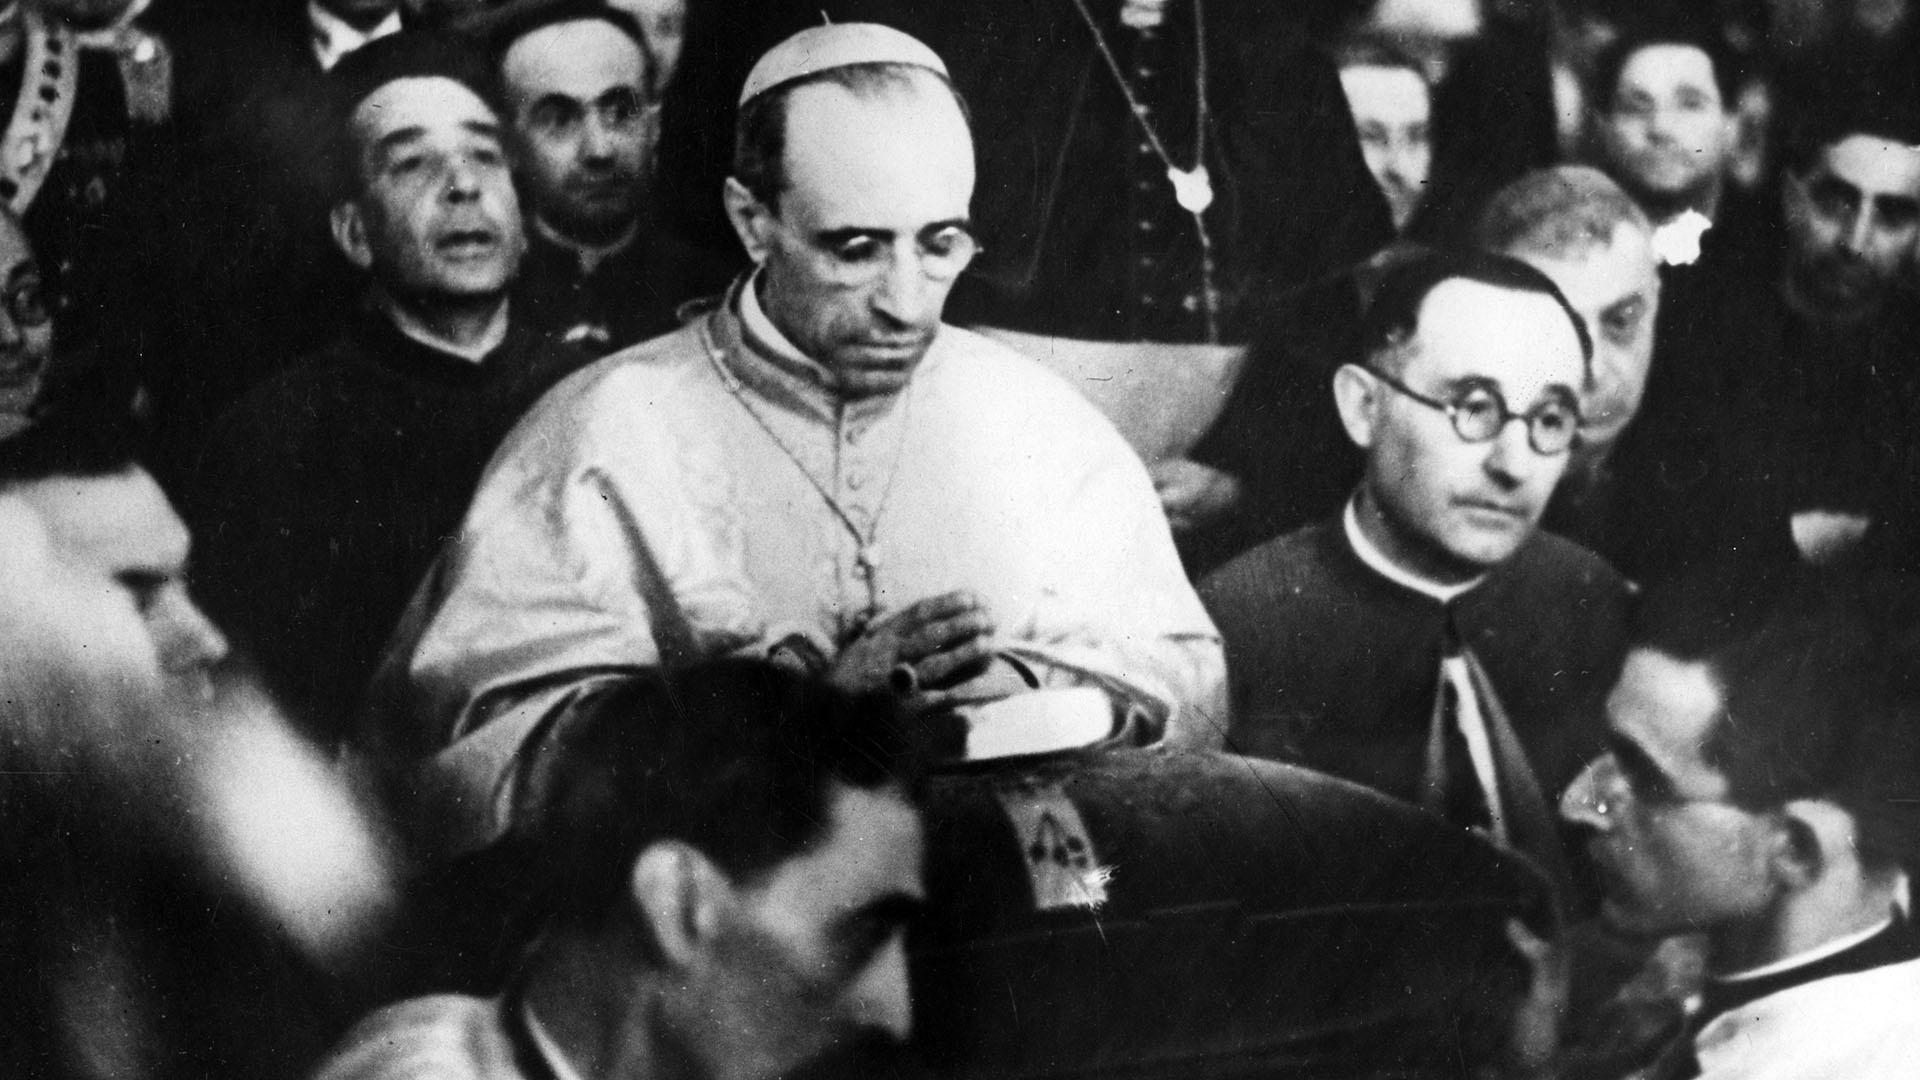 Black and white image of Pope Pius XII.